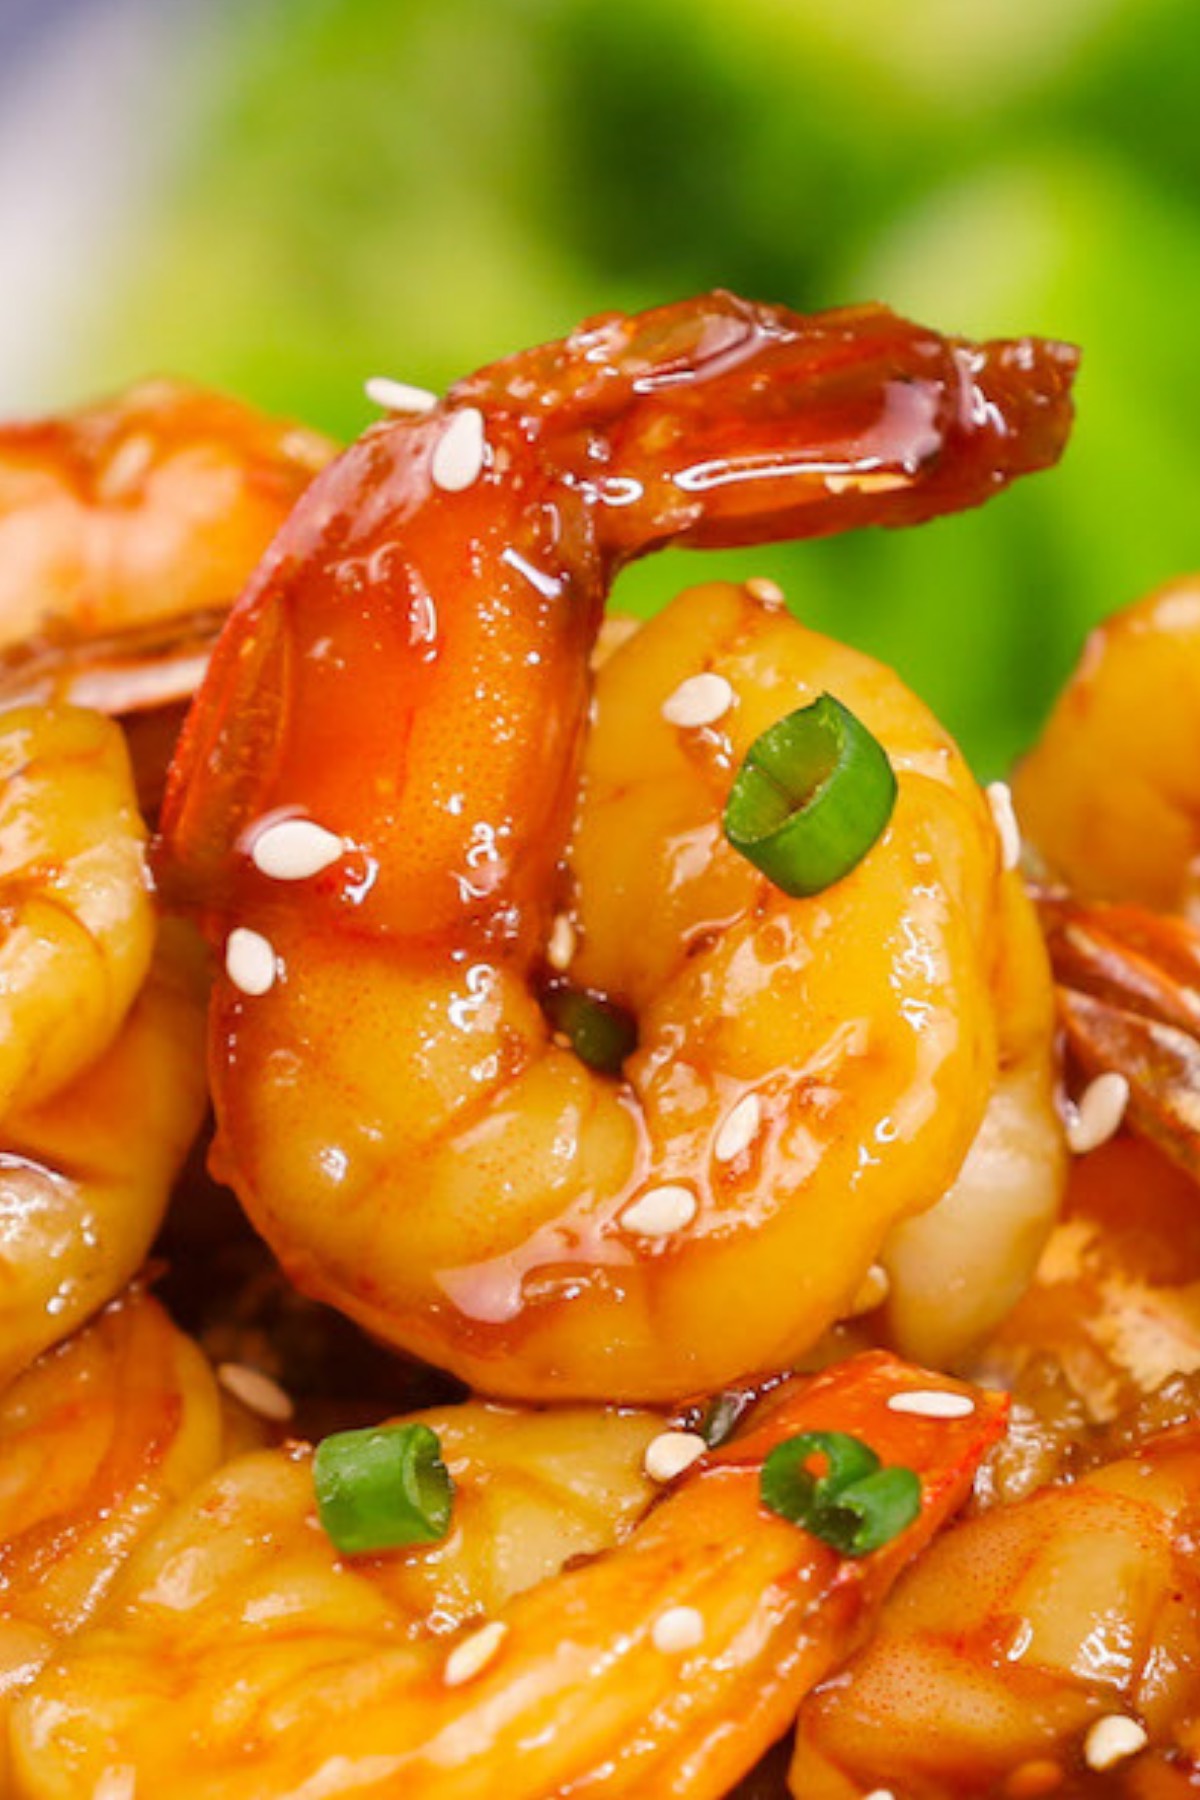 Did you know that you can cook frozen shrimp straight out of the freezer with no thawing necessary? Once you learn some simple tips, you’ll get juicy and delicious shrimp every time. We’ve covered different easy methods on cooking frozen shrimp.